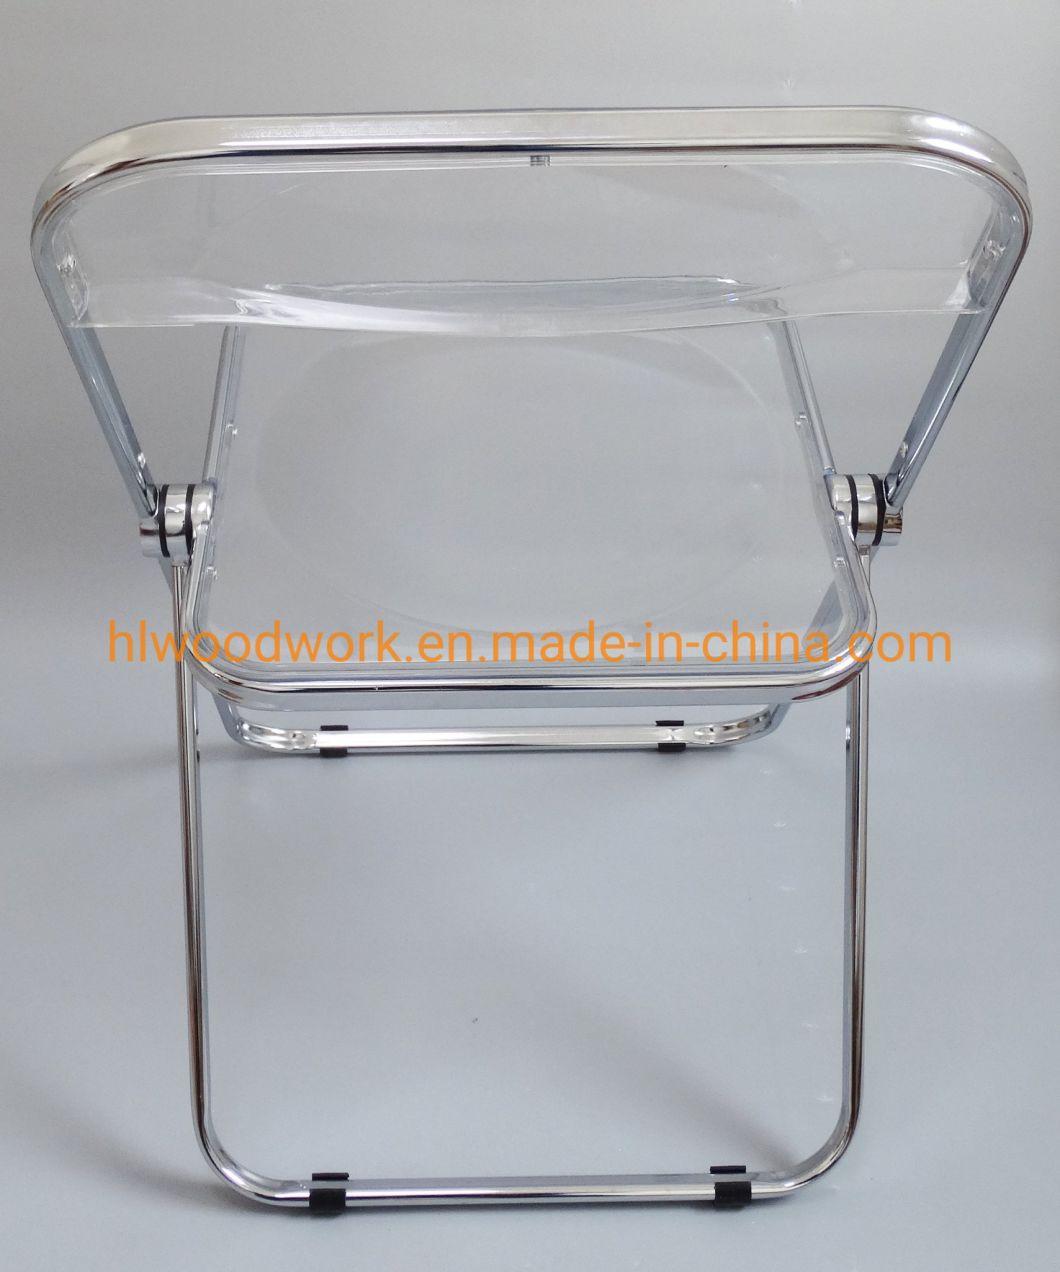 Modern Transparent Red Folding Chair PC Plastic Living Room Seat Chrome Frame Office Bar Dining Leisure Banquet Wedding Meeting Chair Plastic Dining Chair